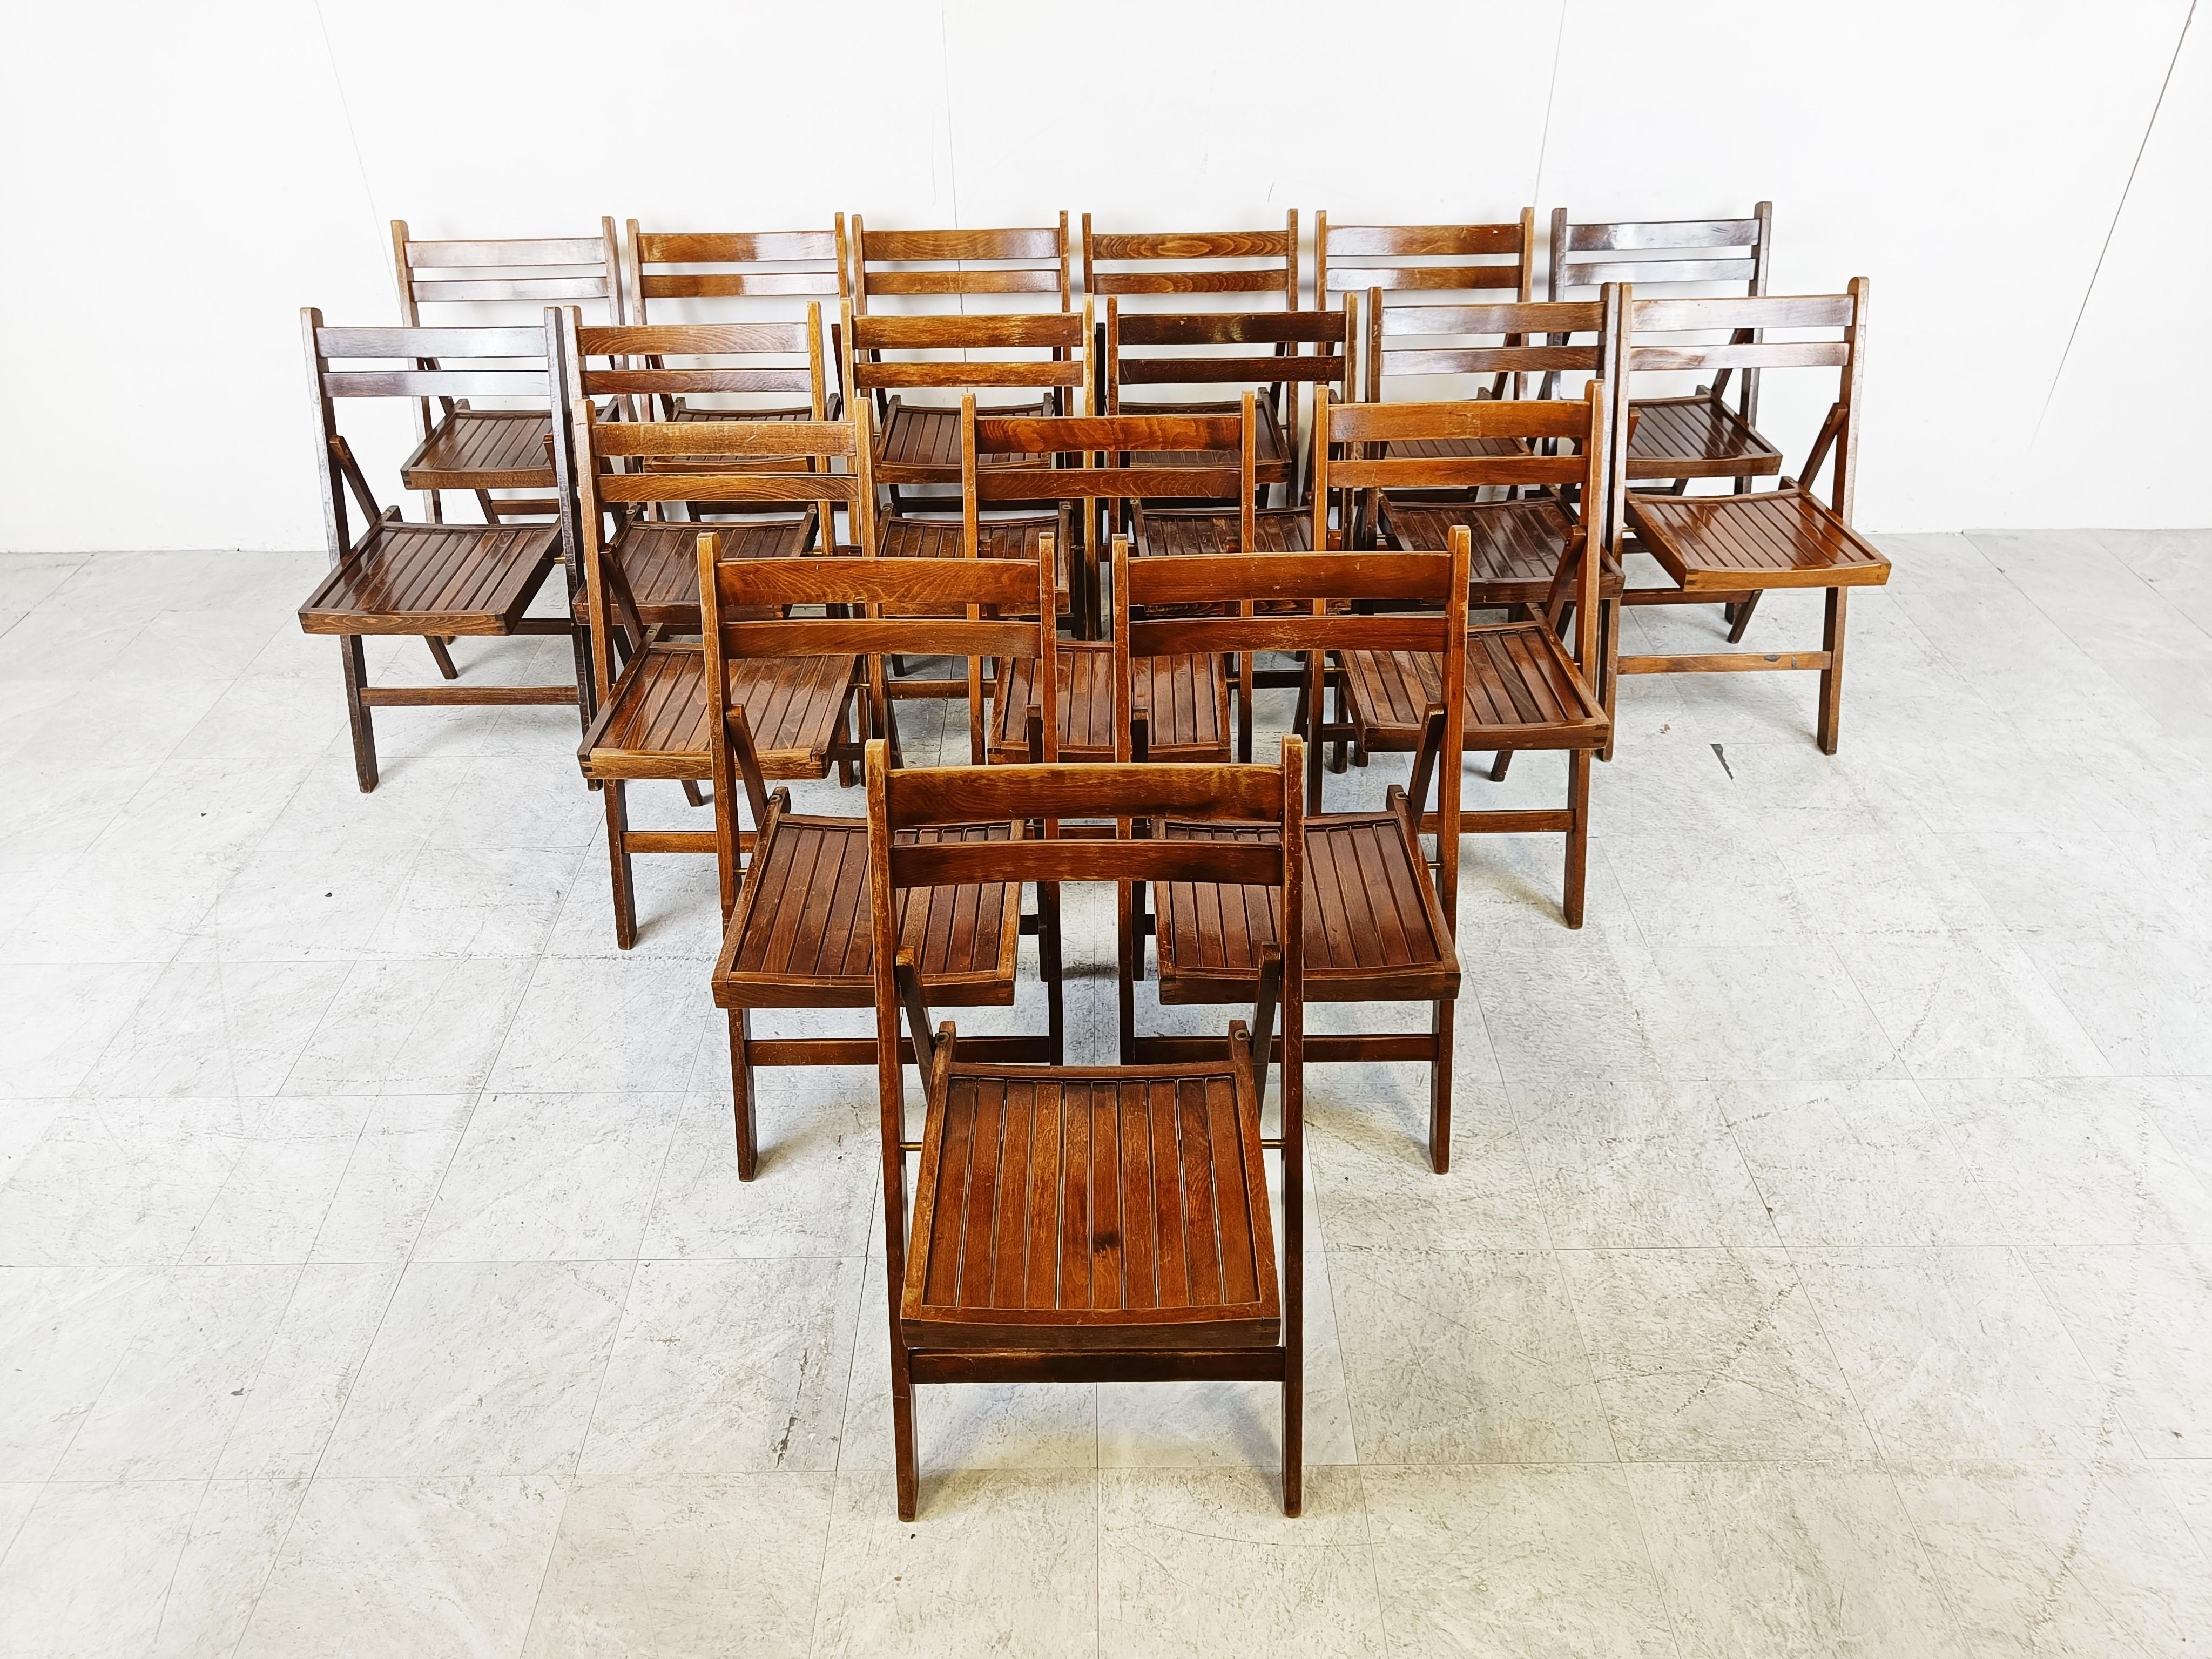 Midcentury wooden folding chairs.

Simple yet elegant design and made in romania in the 1950s.

Beautiful age related wear/patina.

We have 18 pieces available, priced per piece.

Dimensions: 
Height: 81cm/31.88